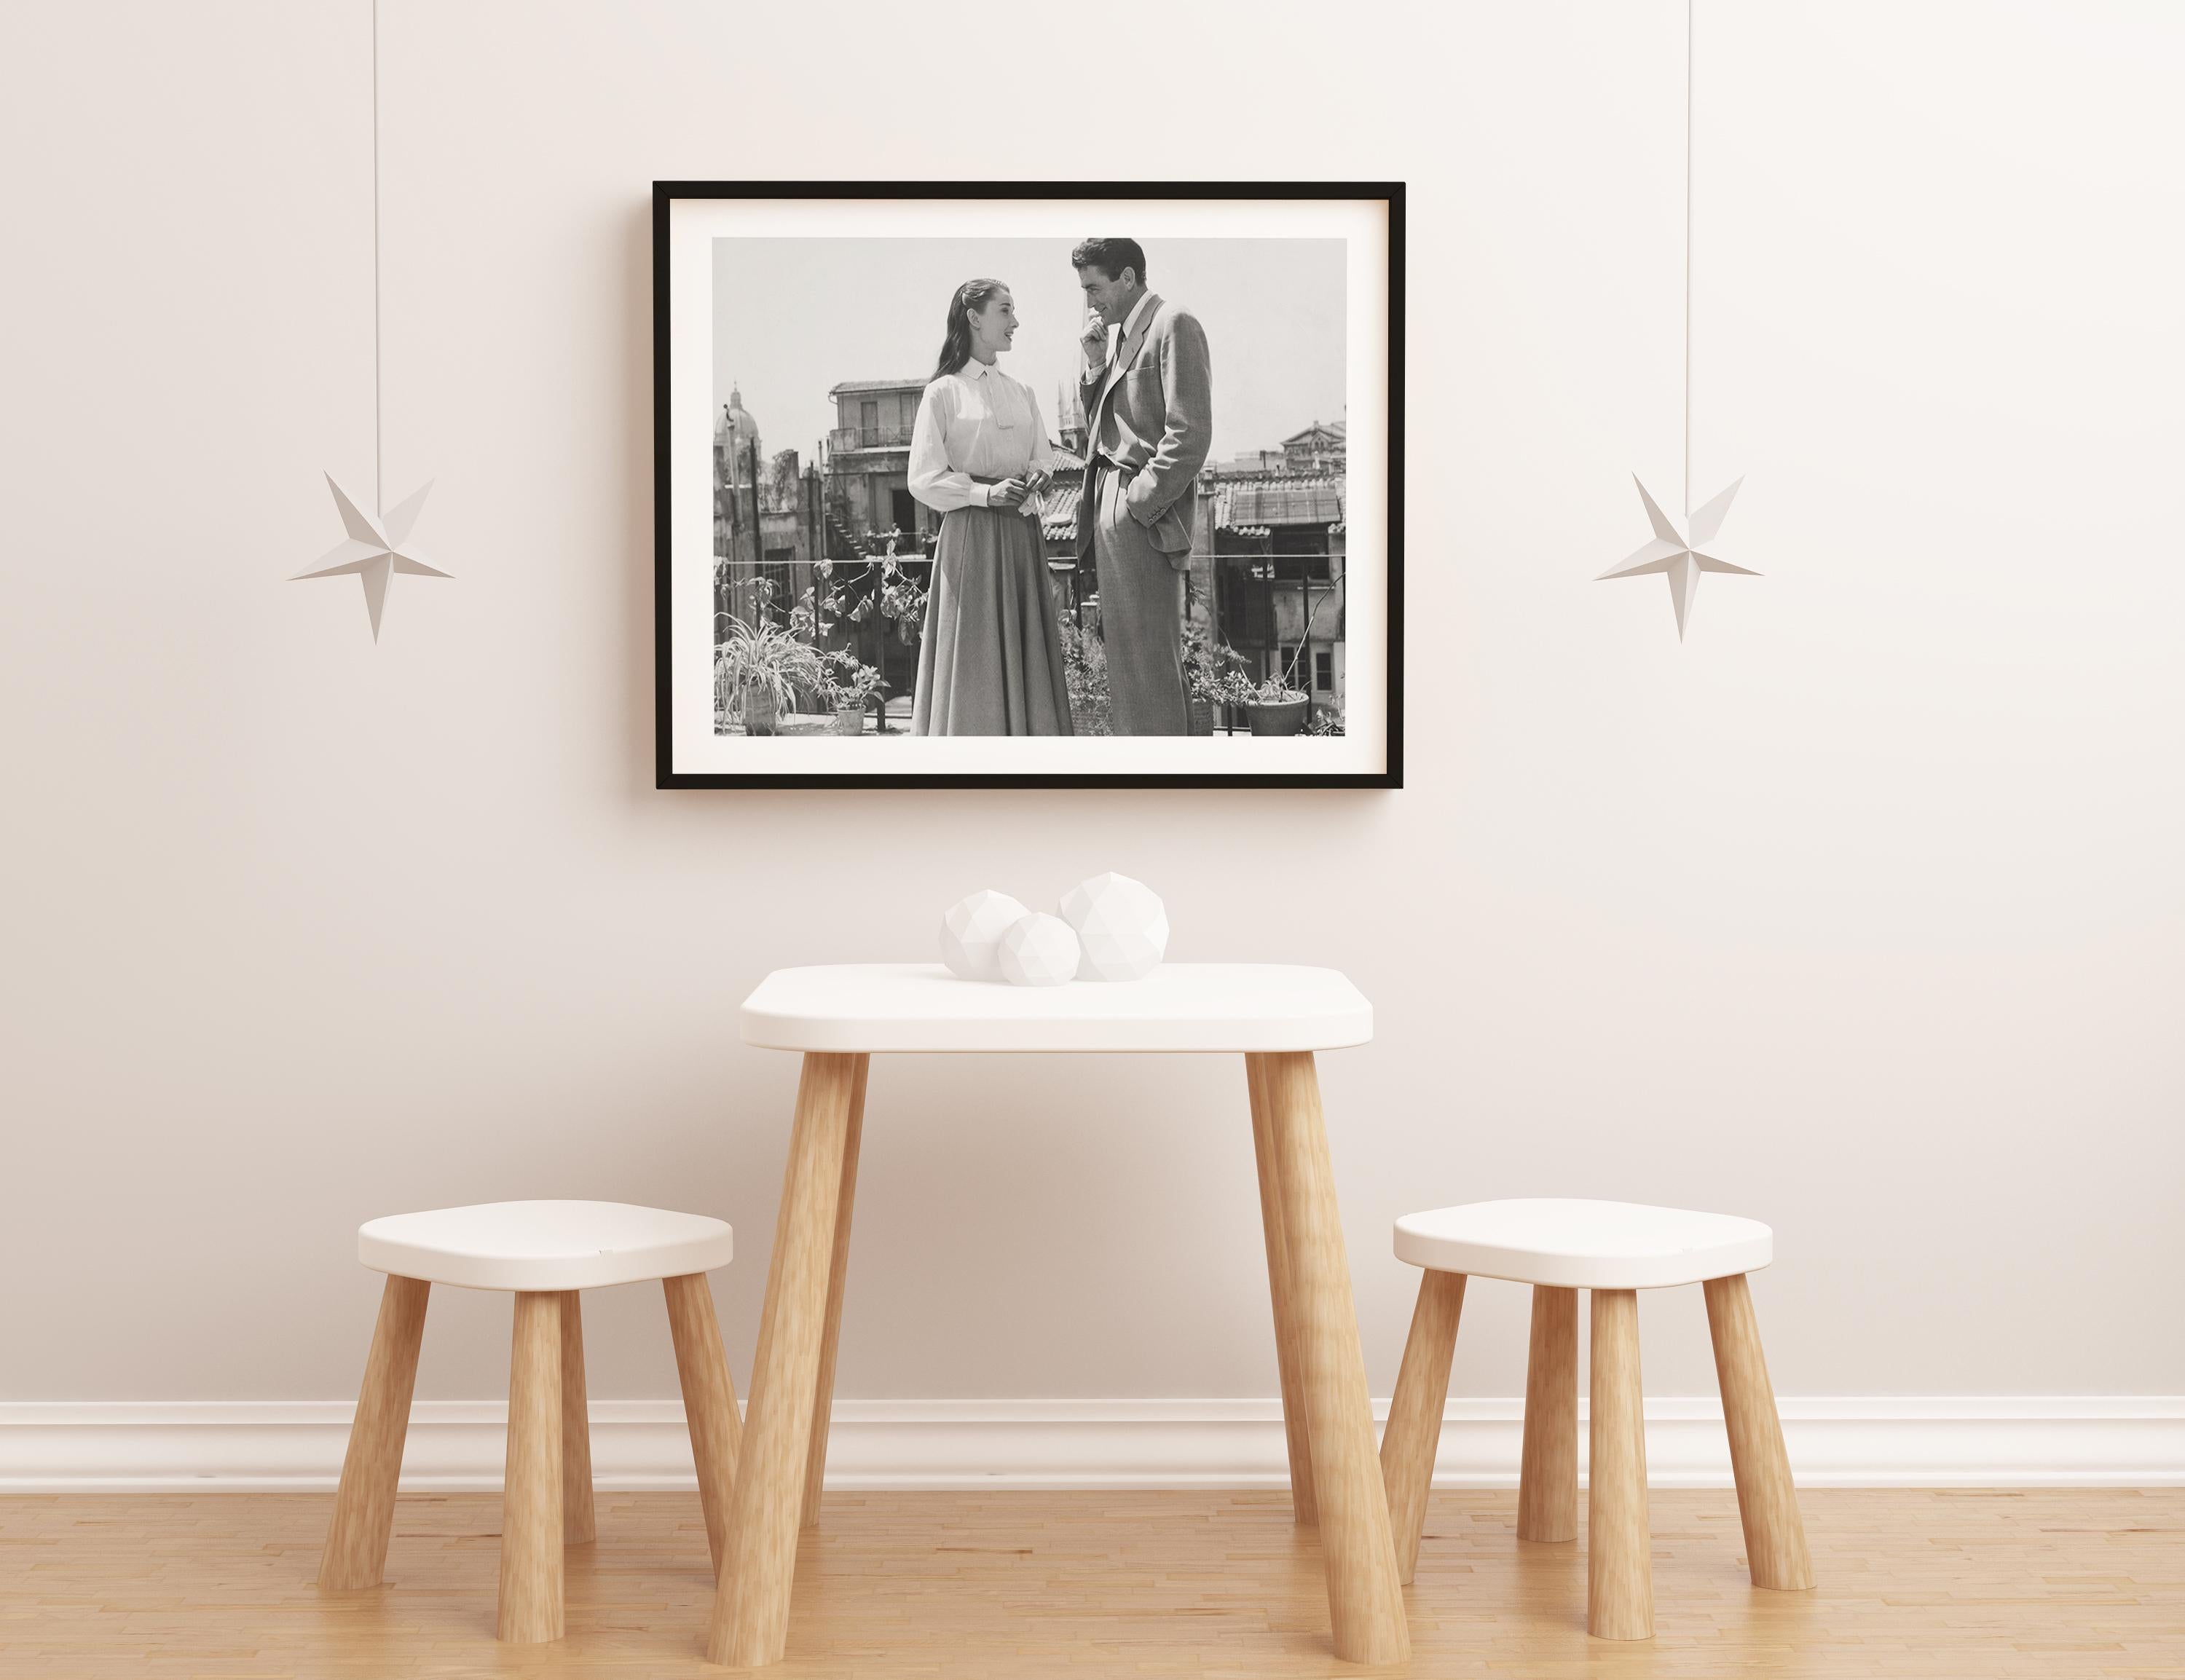 Audrey Hepburn and Gregory Peck in Roman Holiday Globe Photos Fine Art Print - Gray Black and White Photograph by Unknown